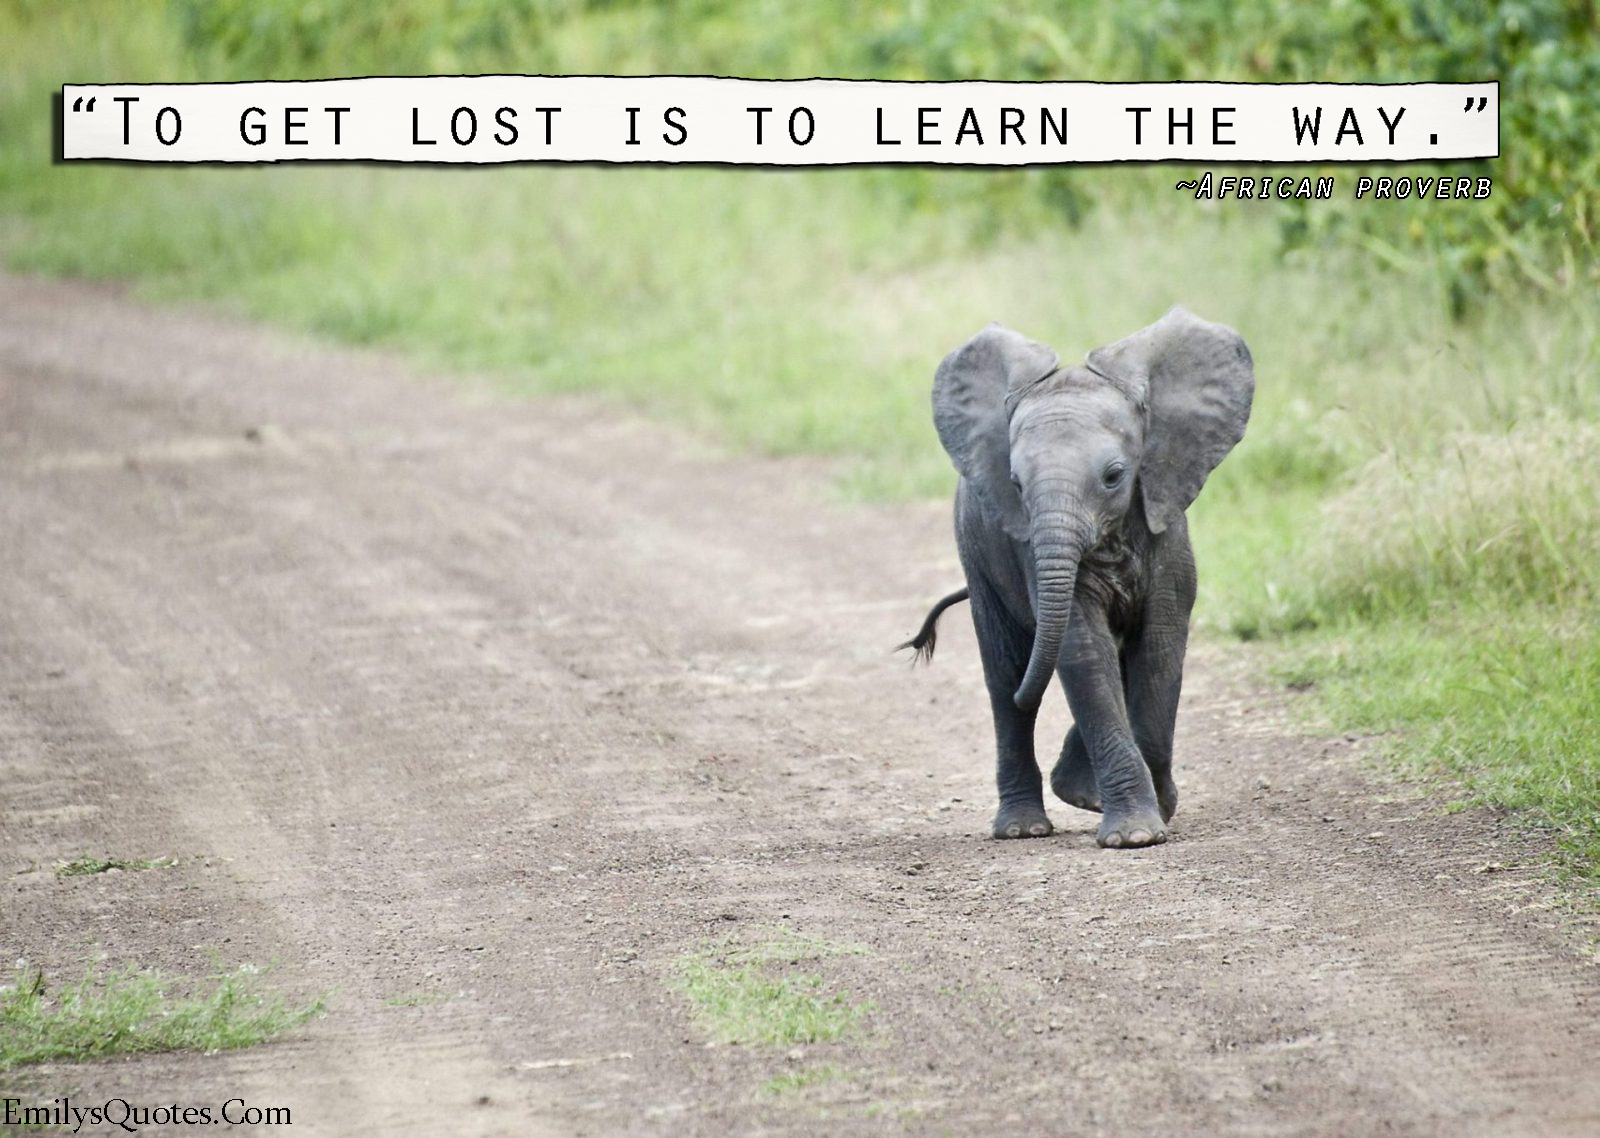 To get lost is to learn the way